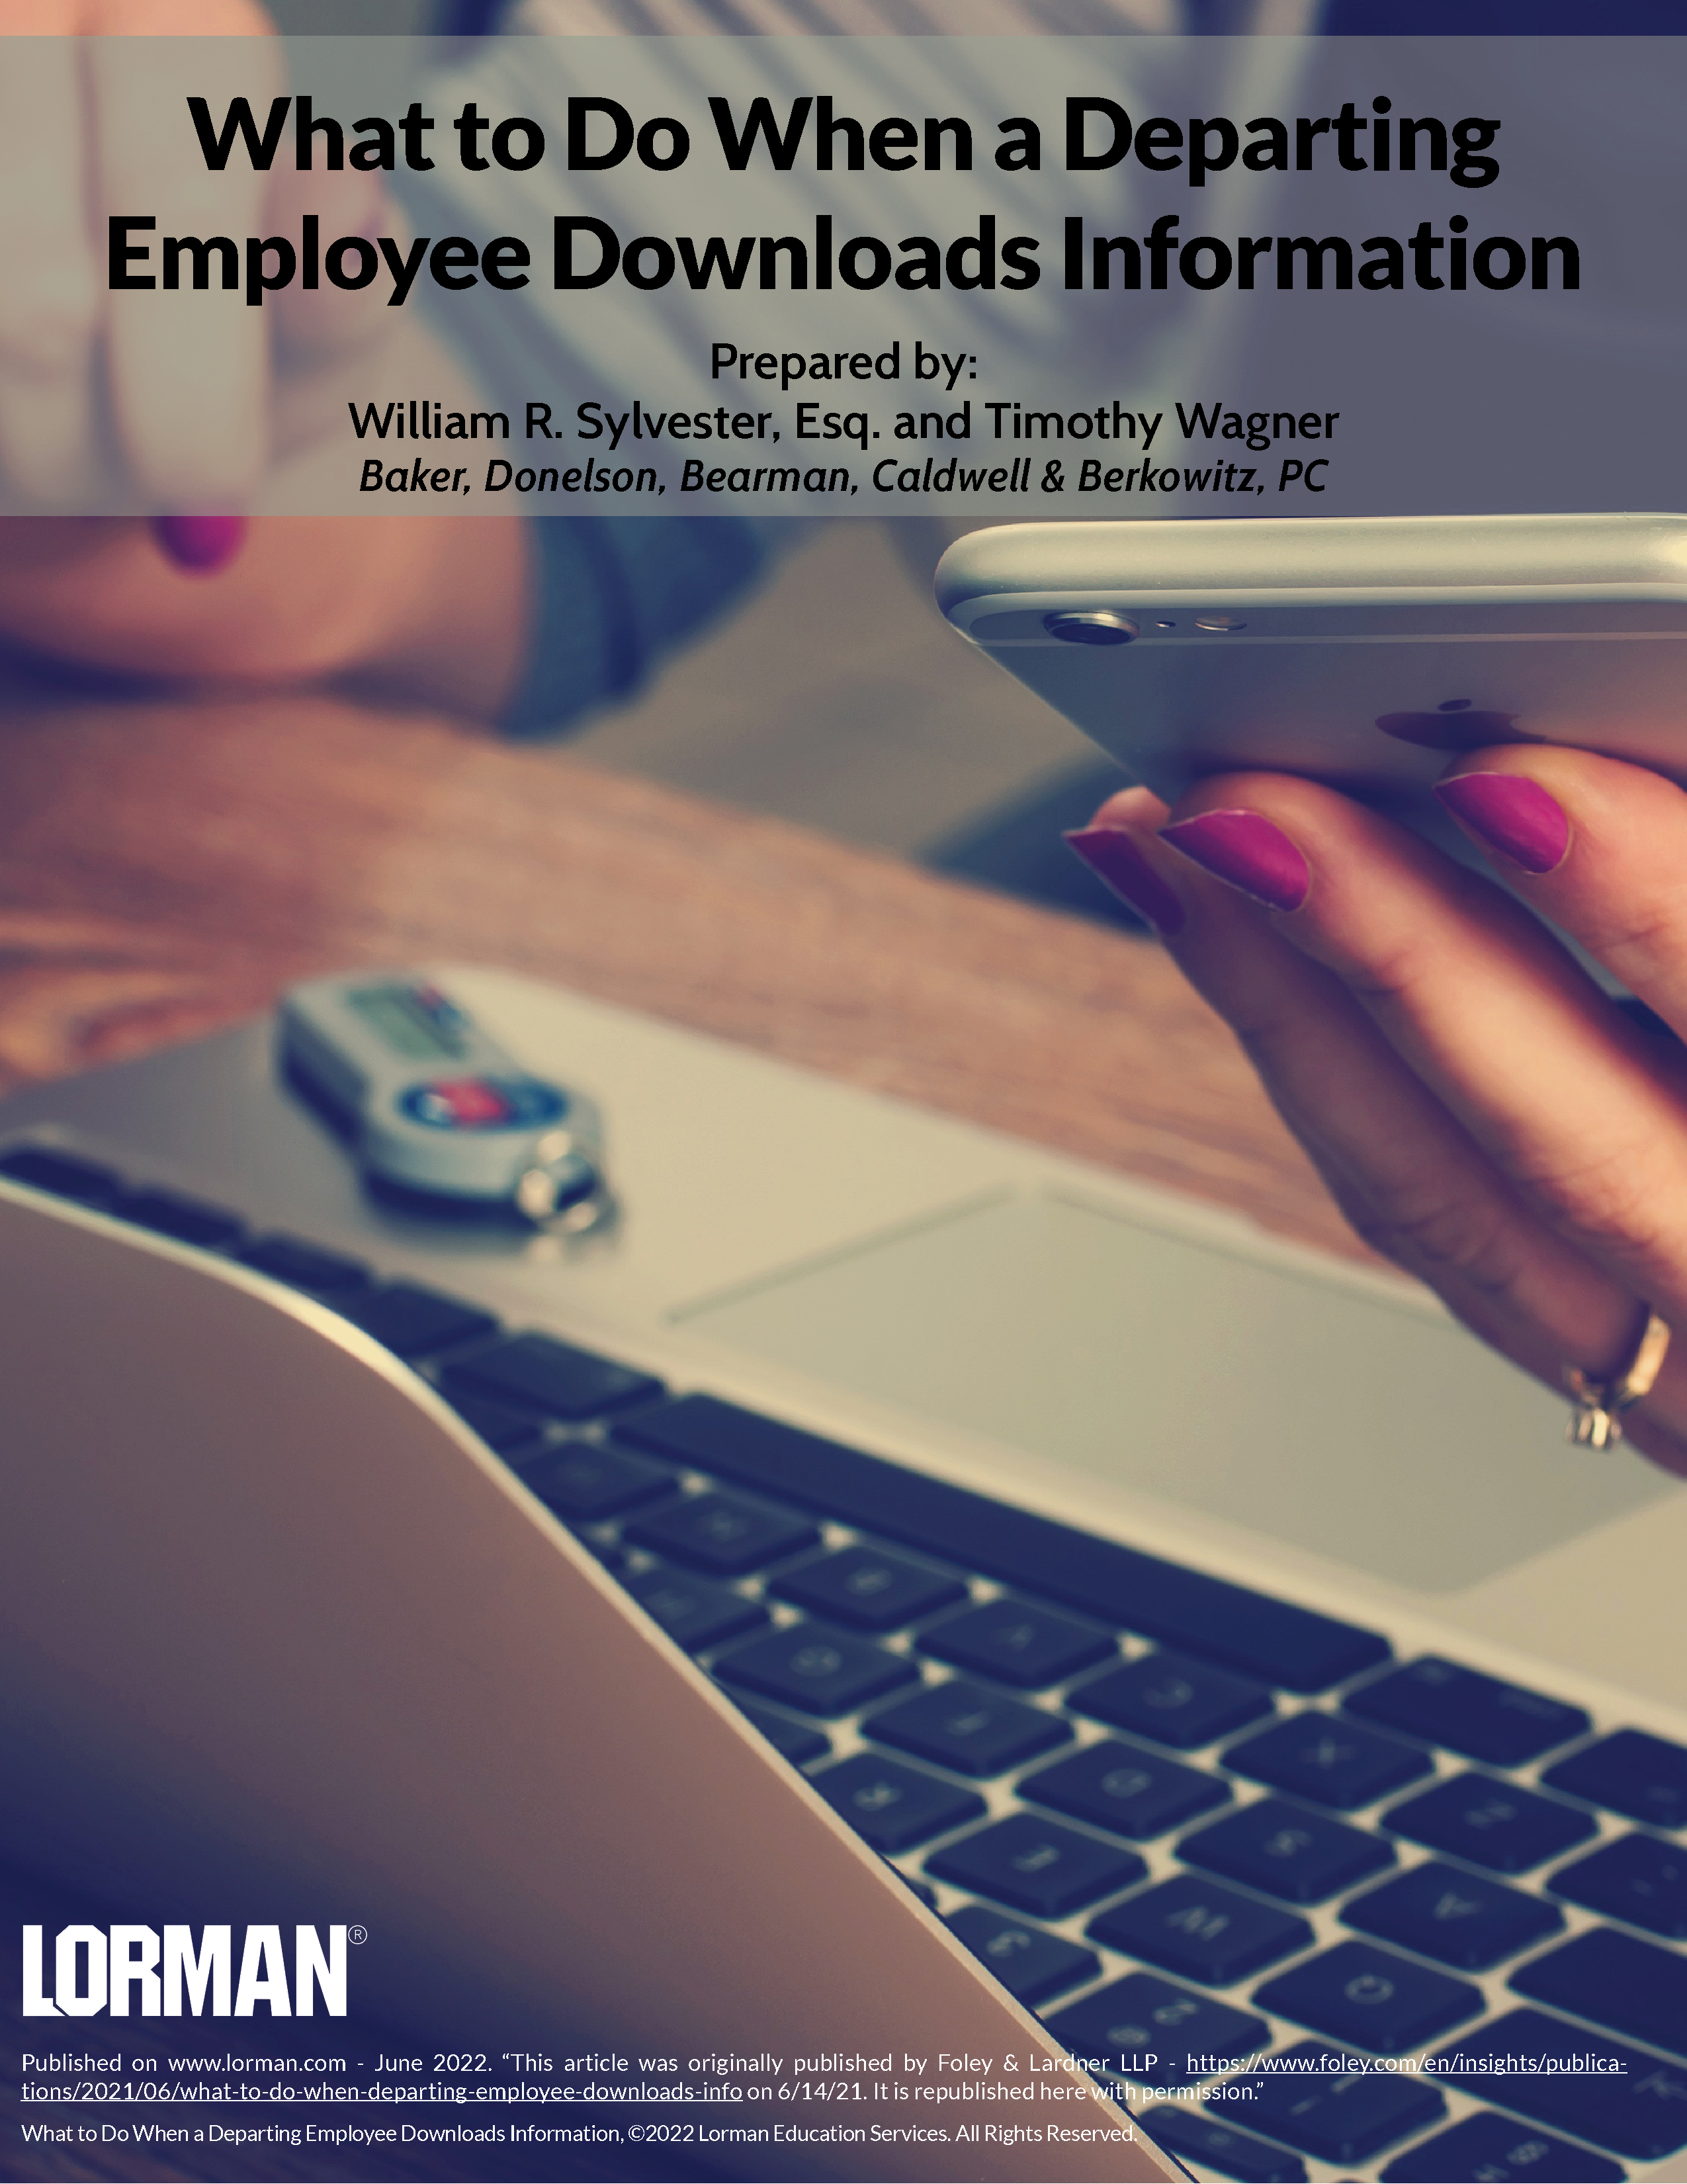 What to Do When a Departing Employee Downloads Information